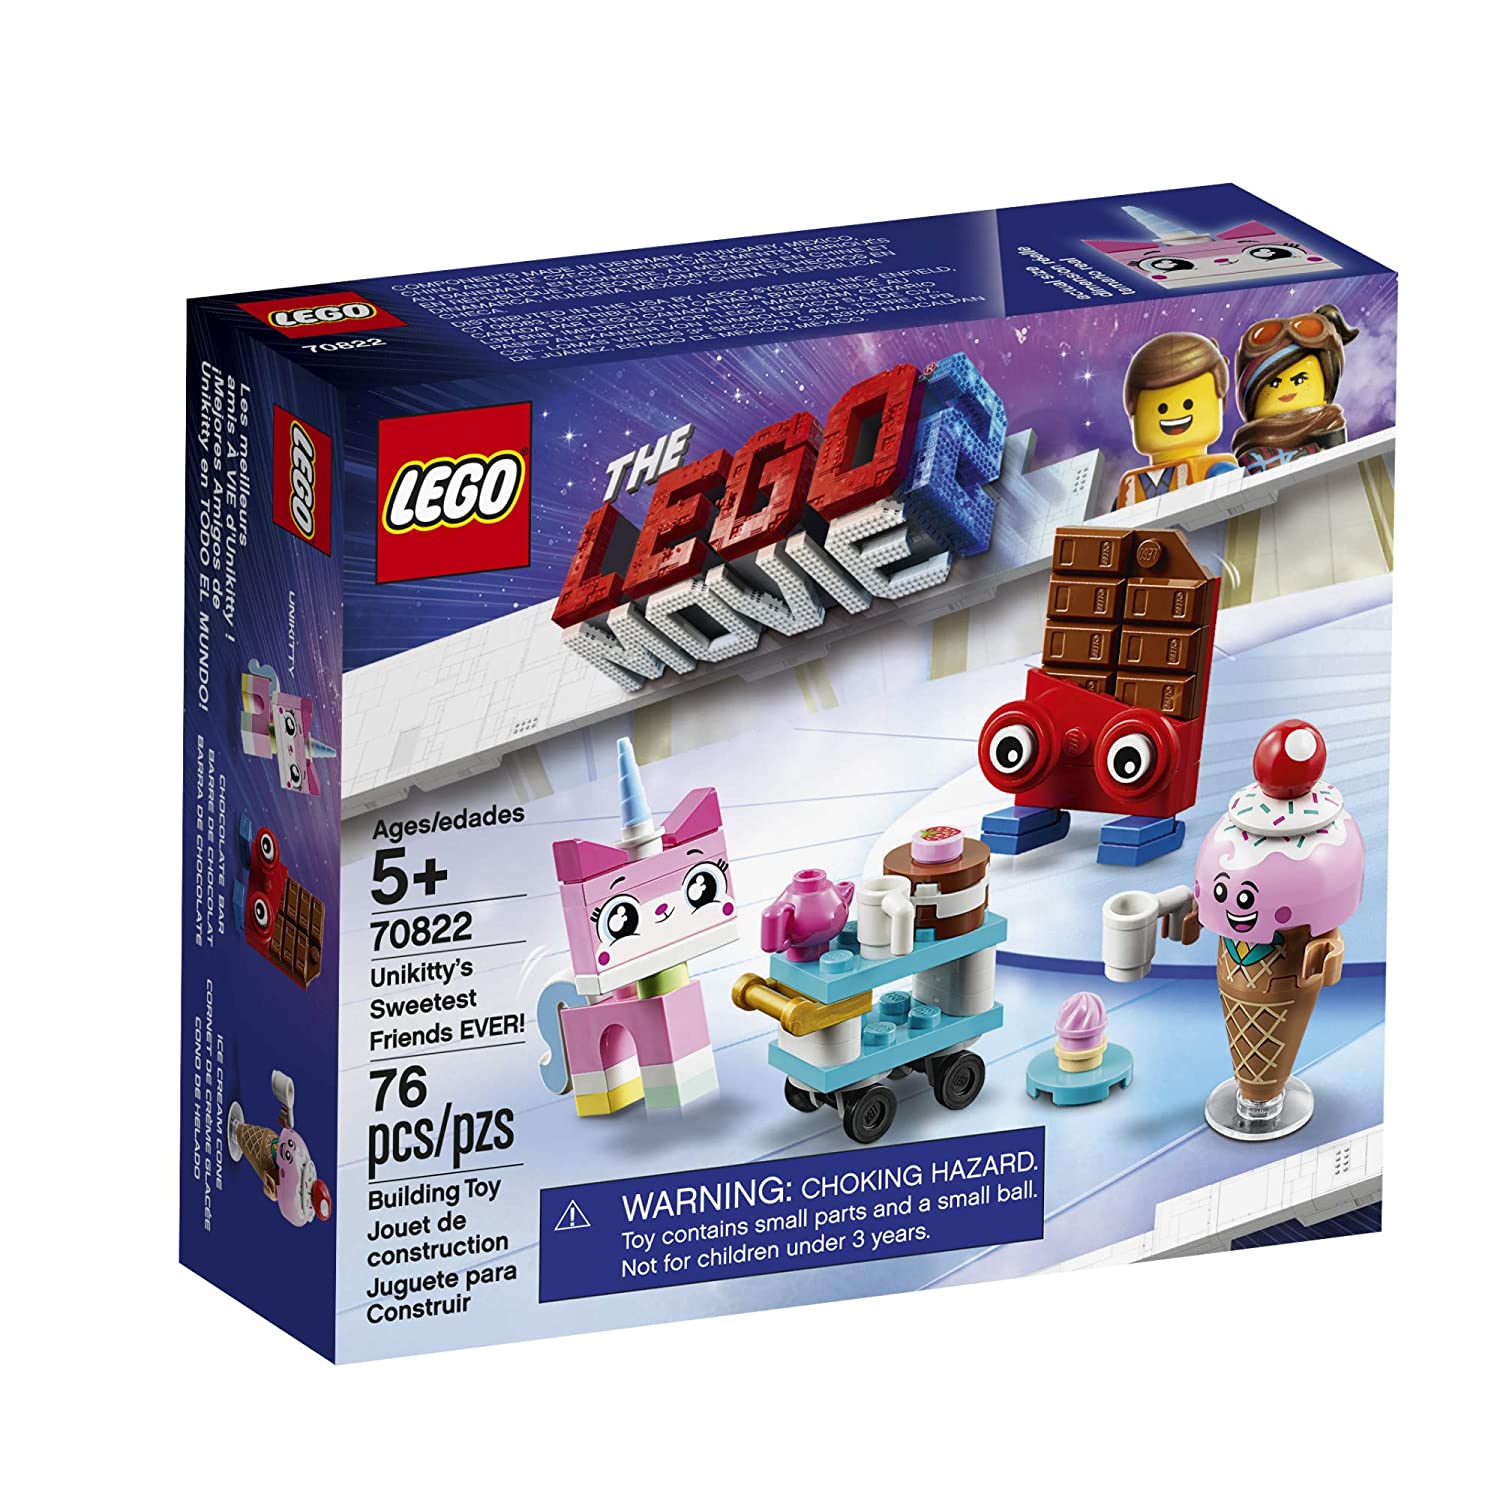 Top 7 Best LEGO Unikitty Sets Reviews in 2022 6